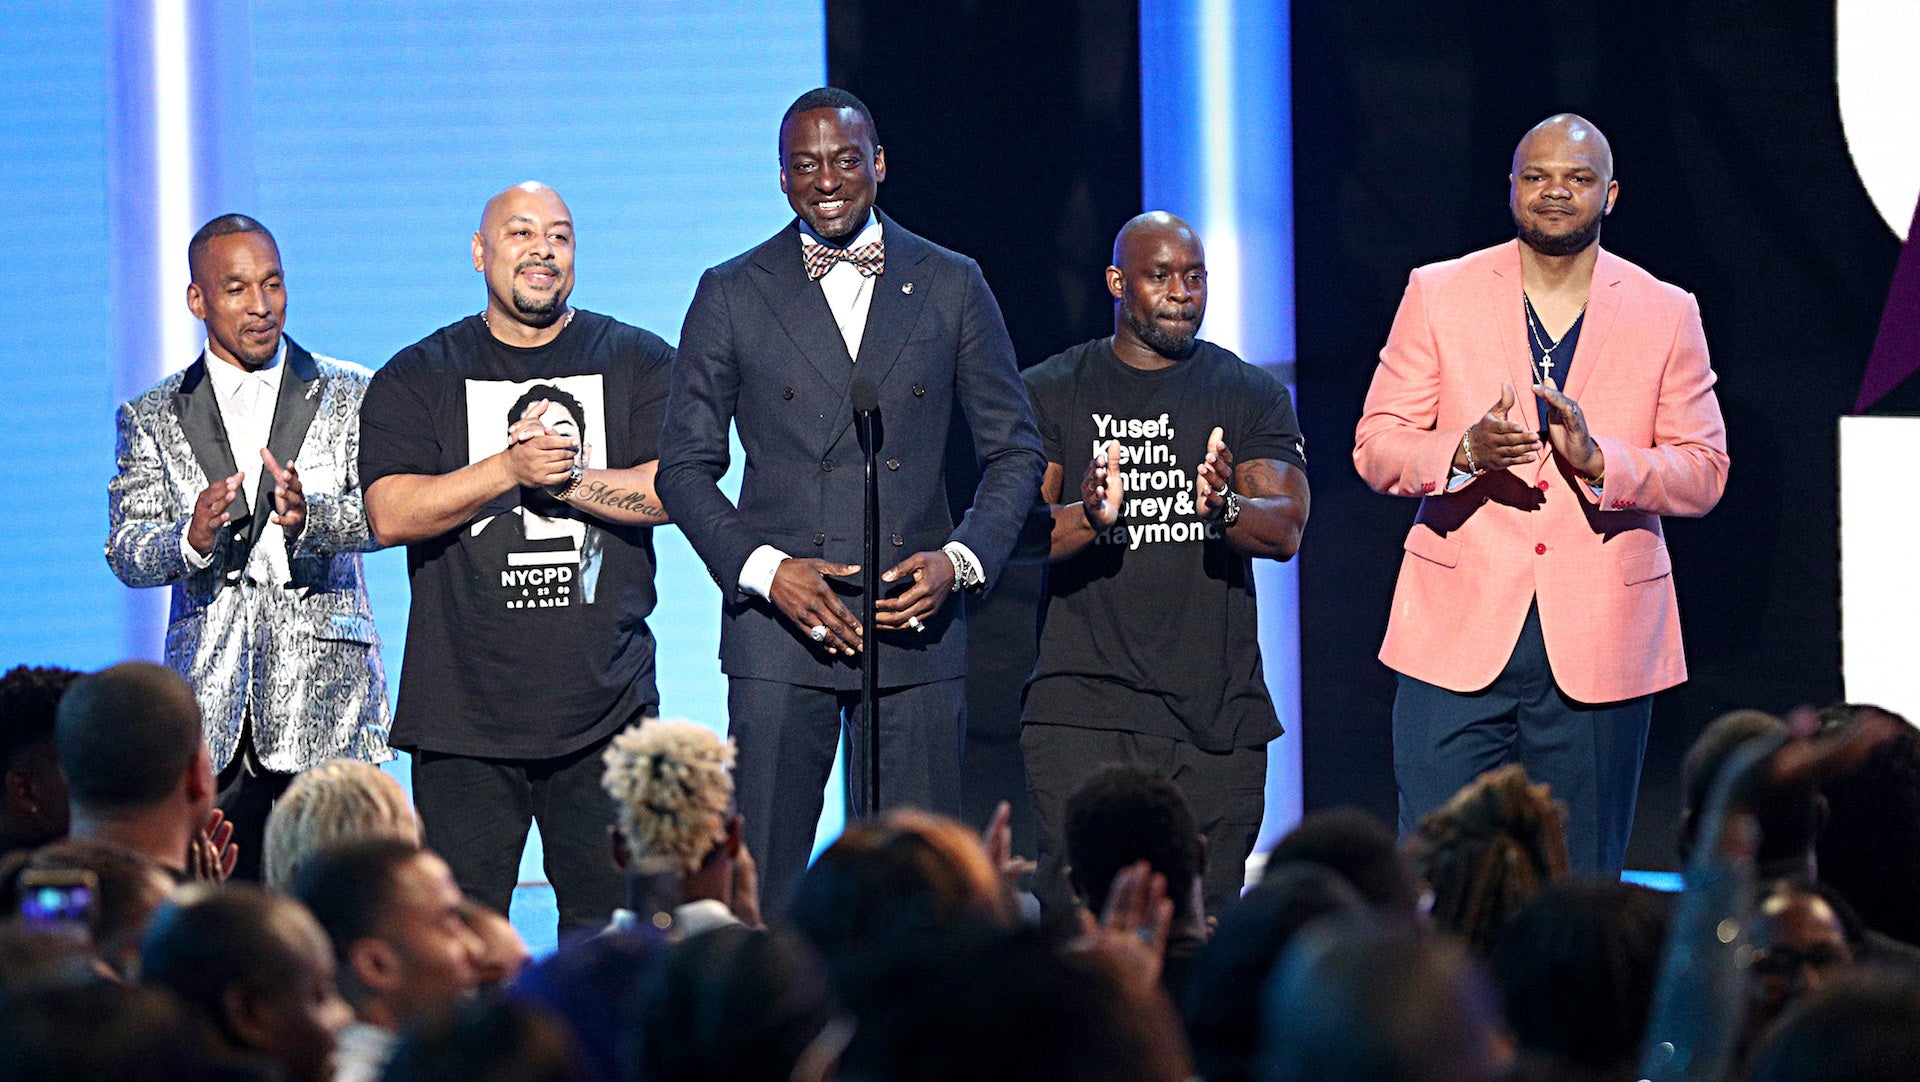 The Exonerated Five Get A Standing Ovation At The BET Awards 2019